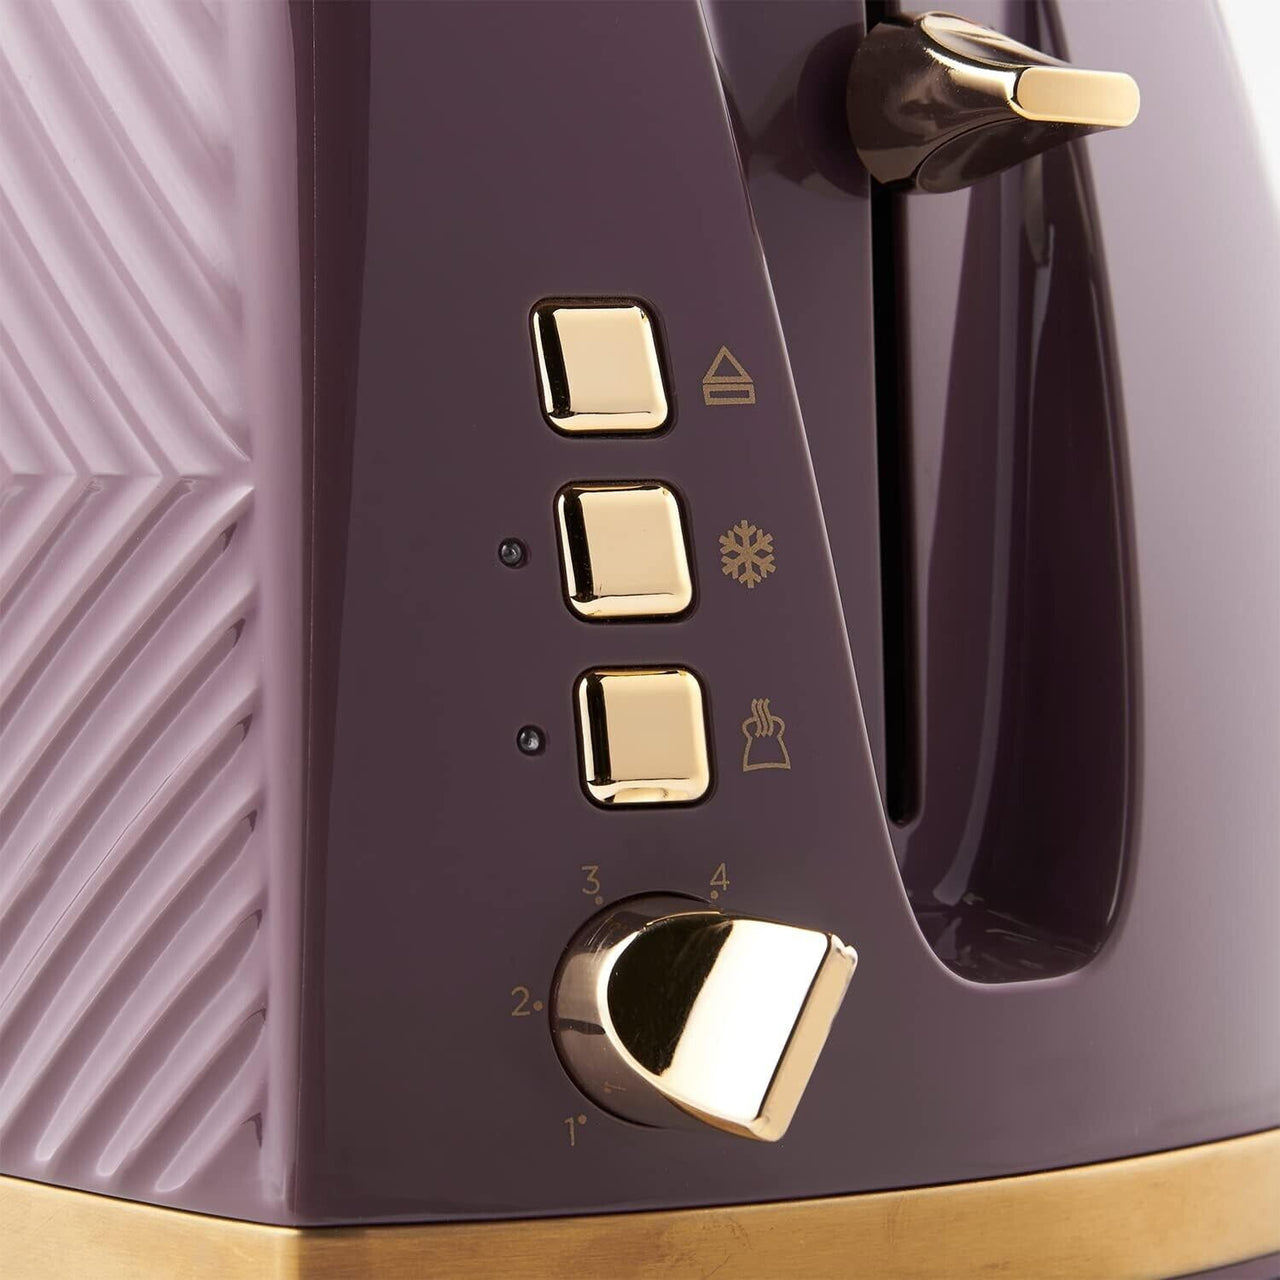 Russell Hobbs Groove 2 Slice Toaster in Mulberry with Brushed Gold Accents 26393